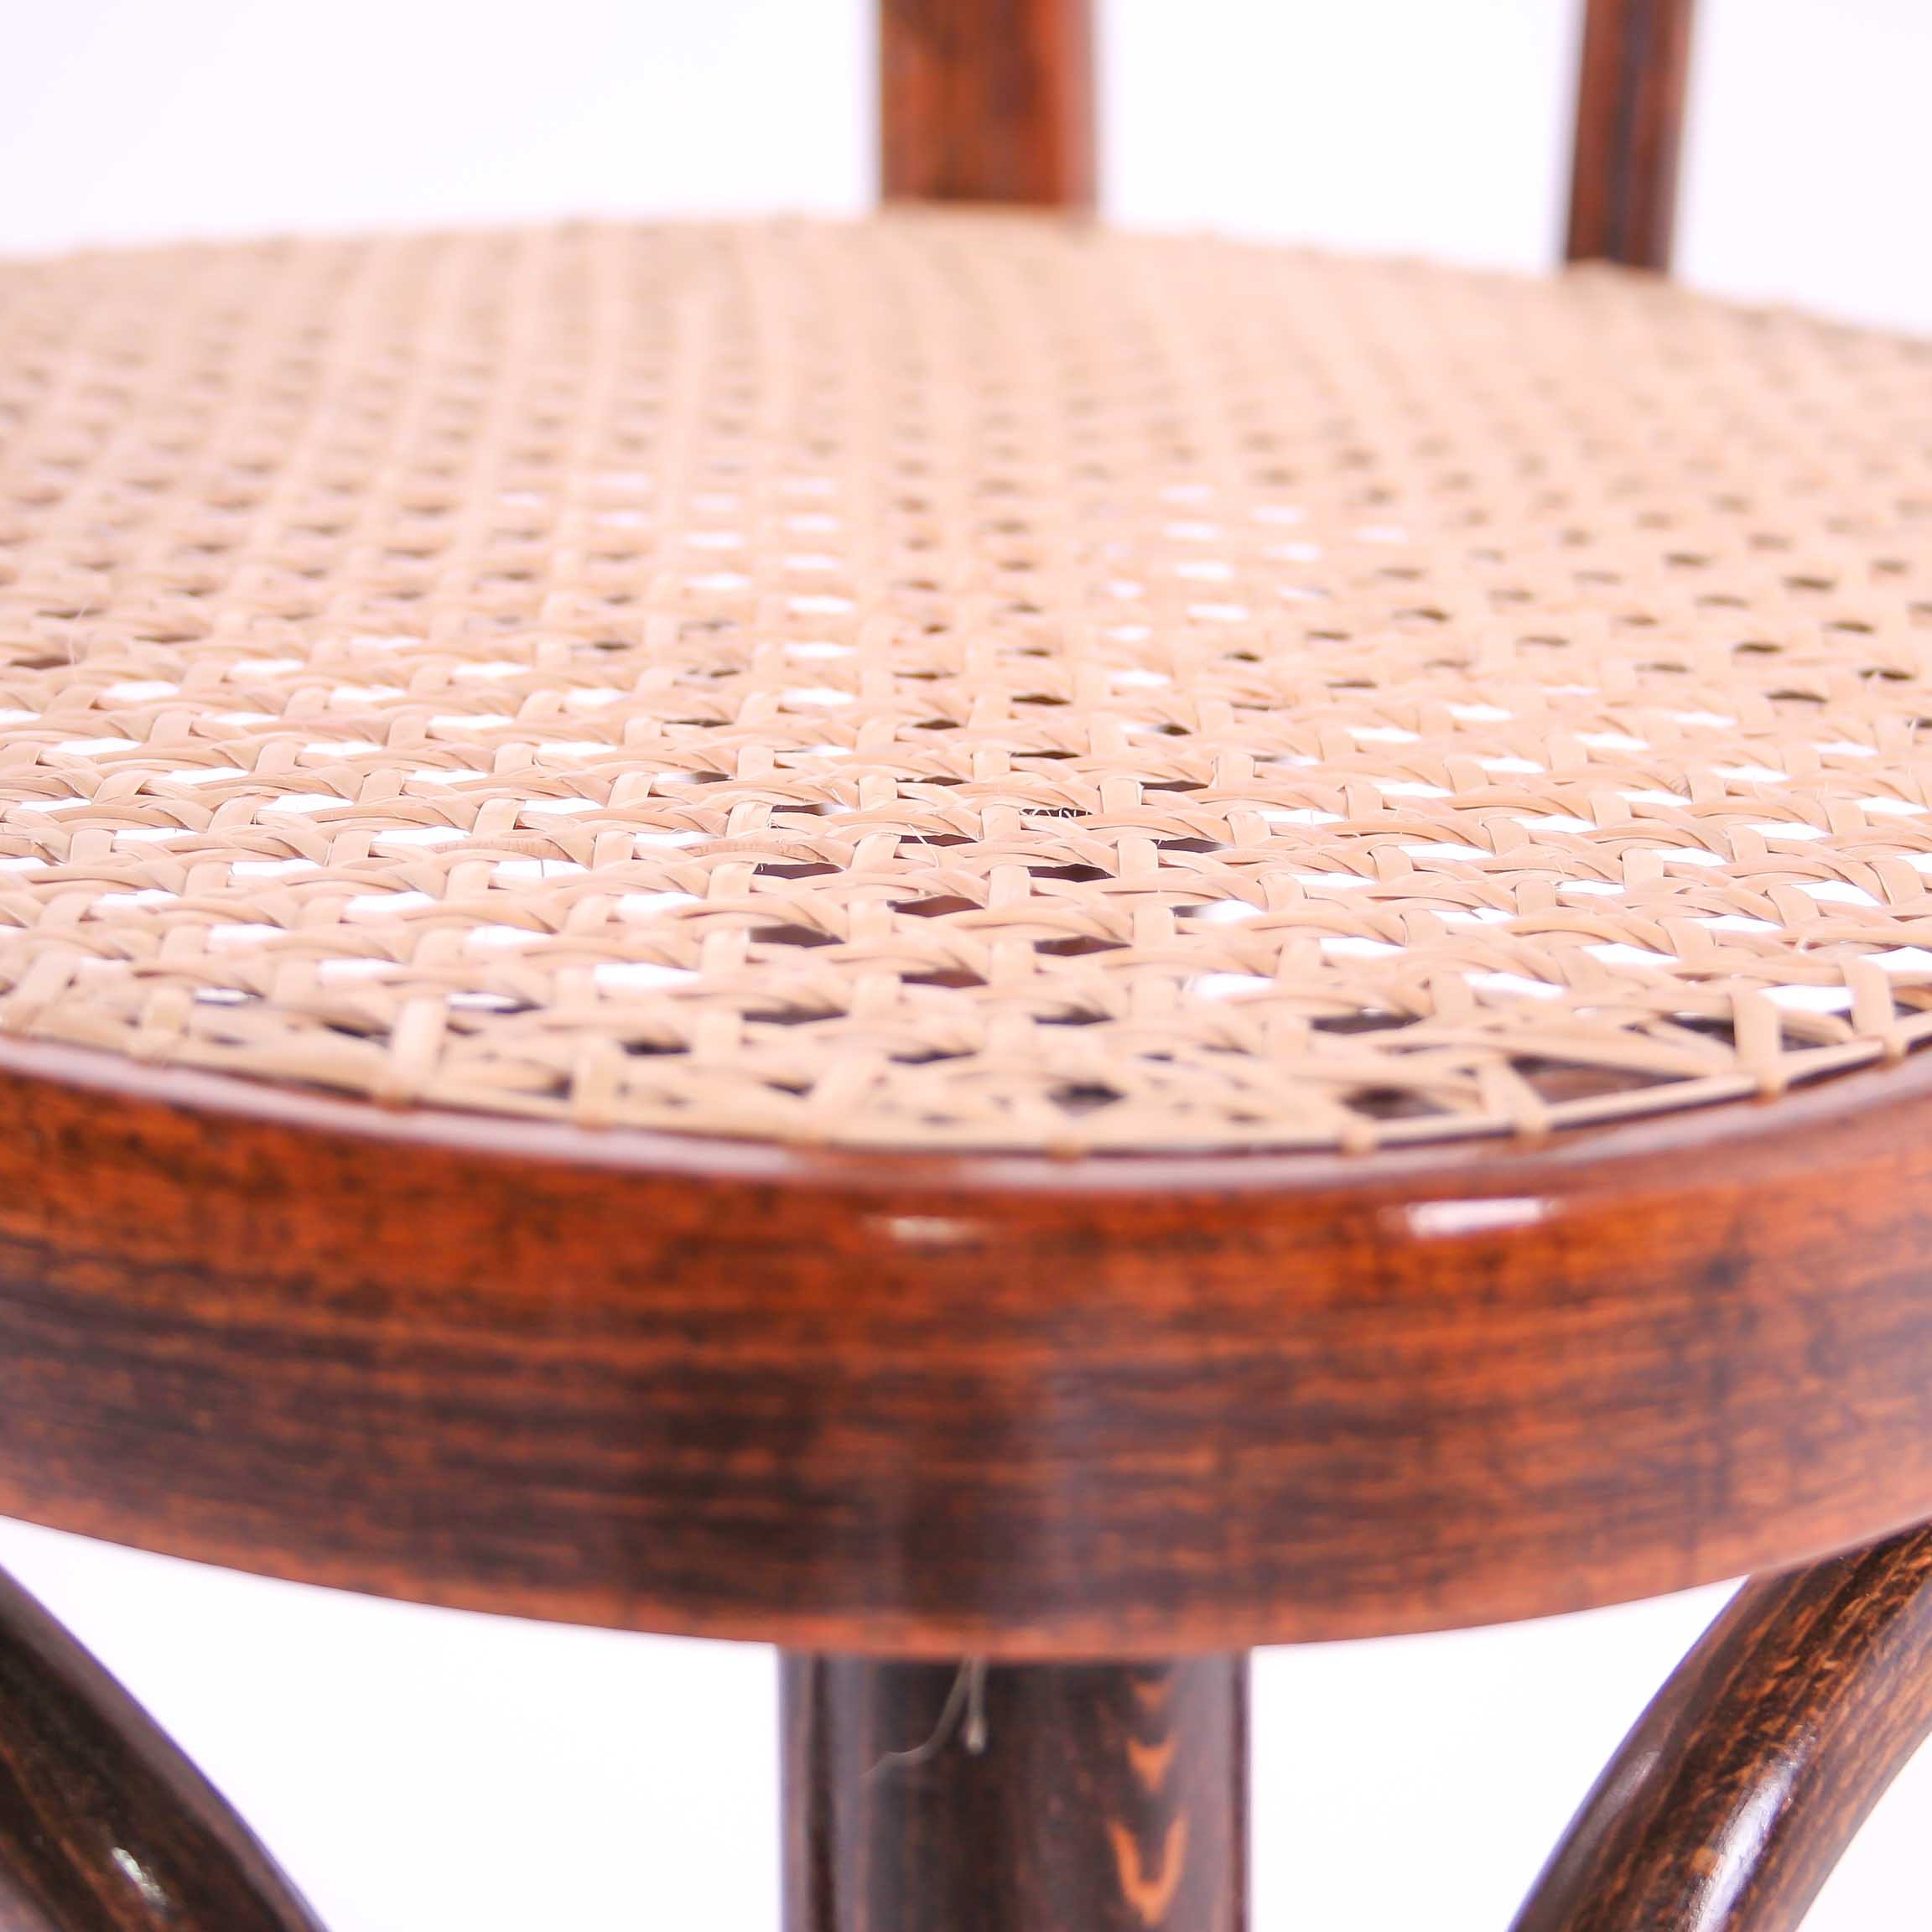 Chair with woven seat